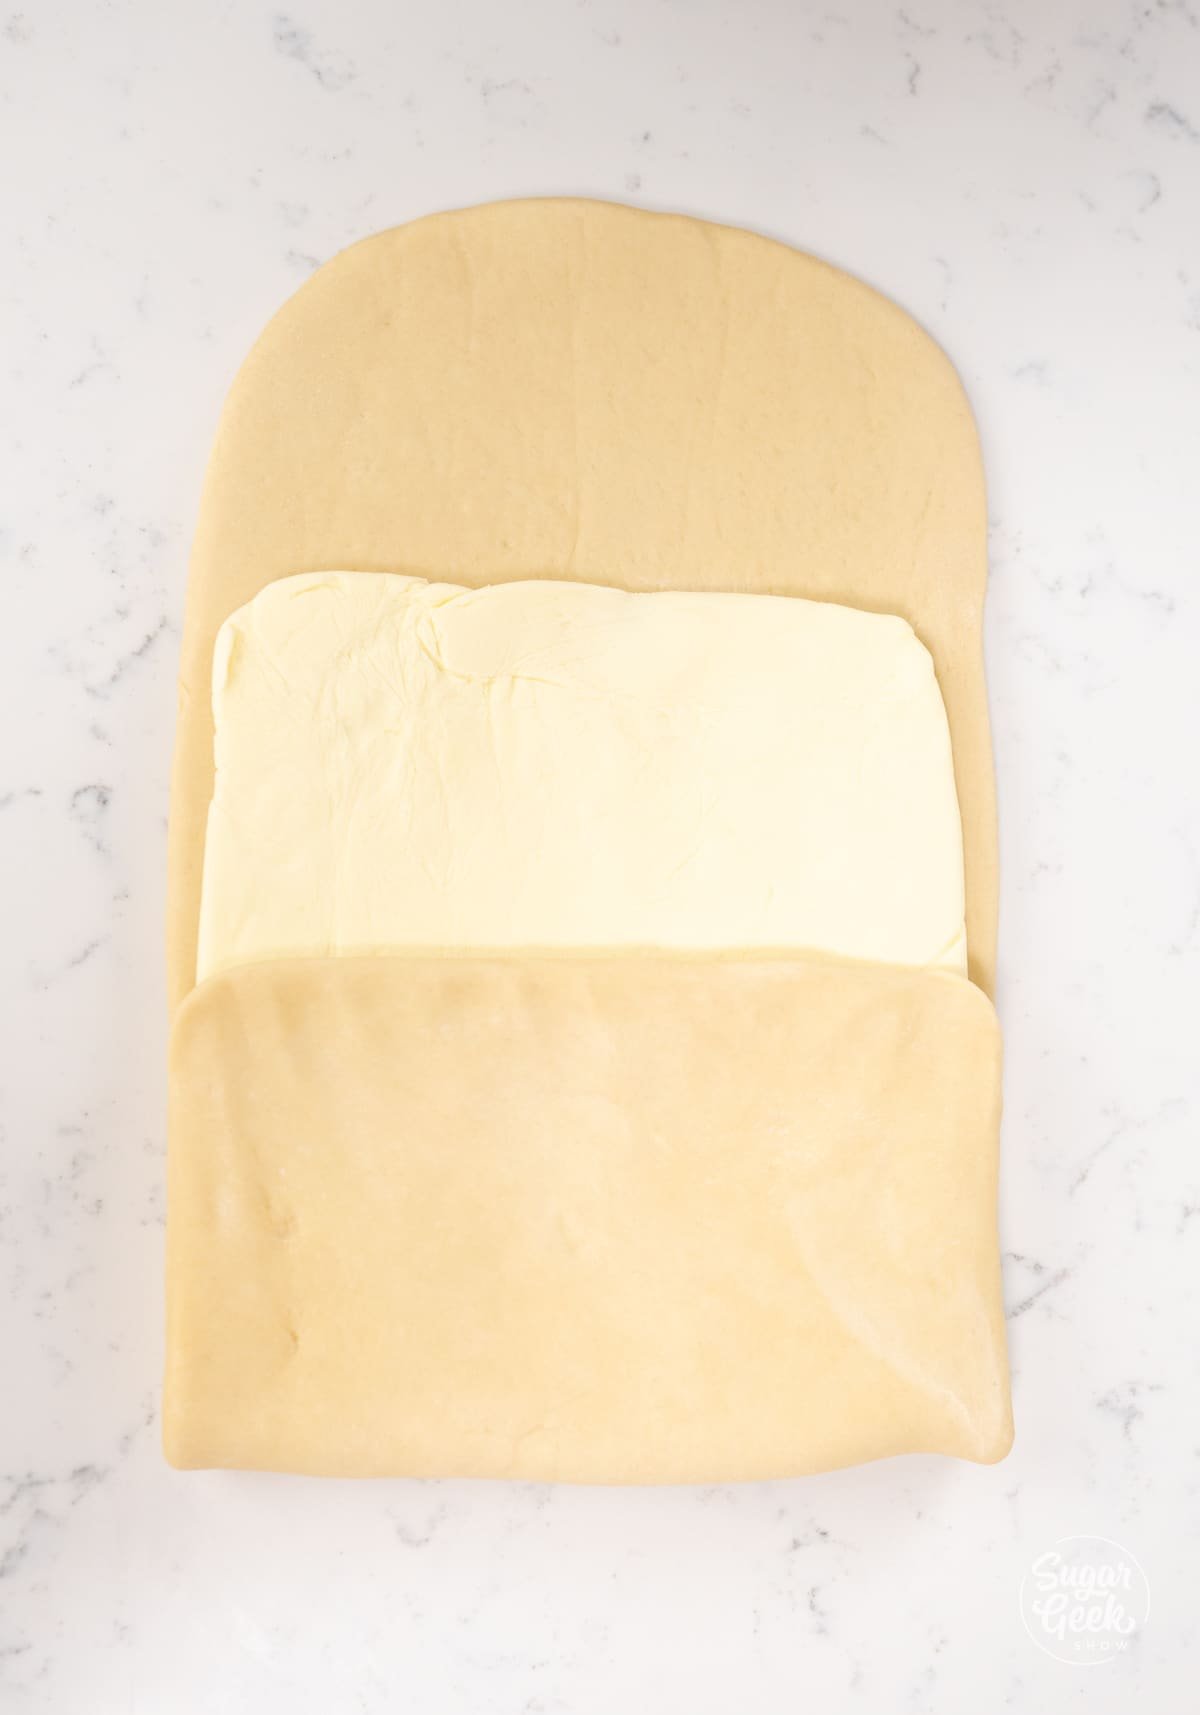 half a rectangle of croissant dough folded over half of a butter square